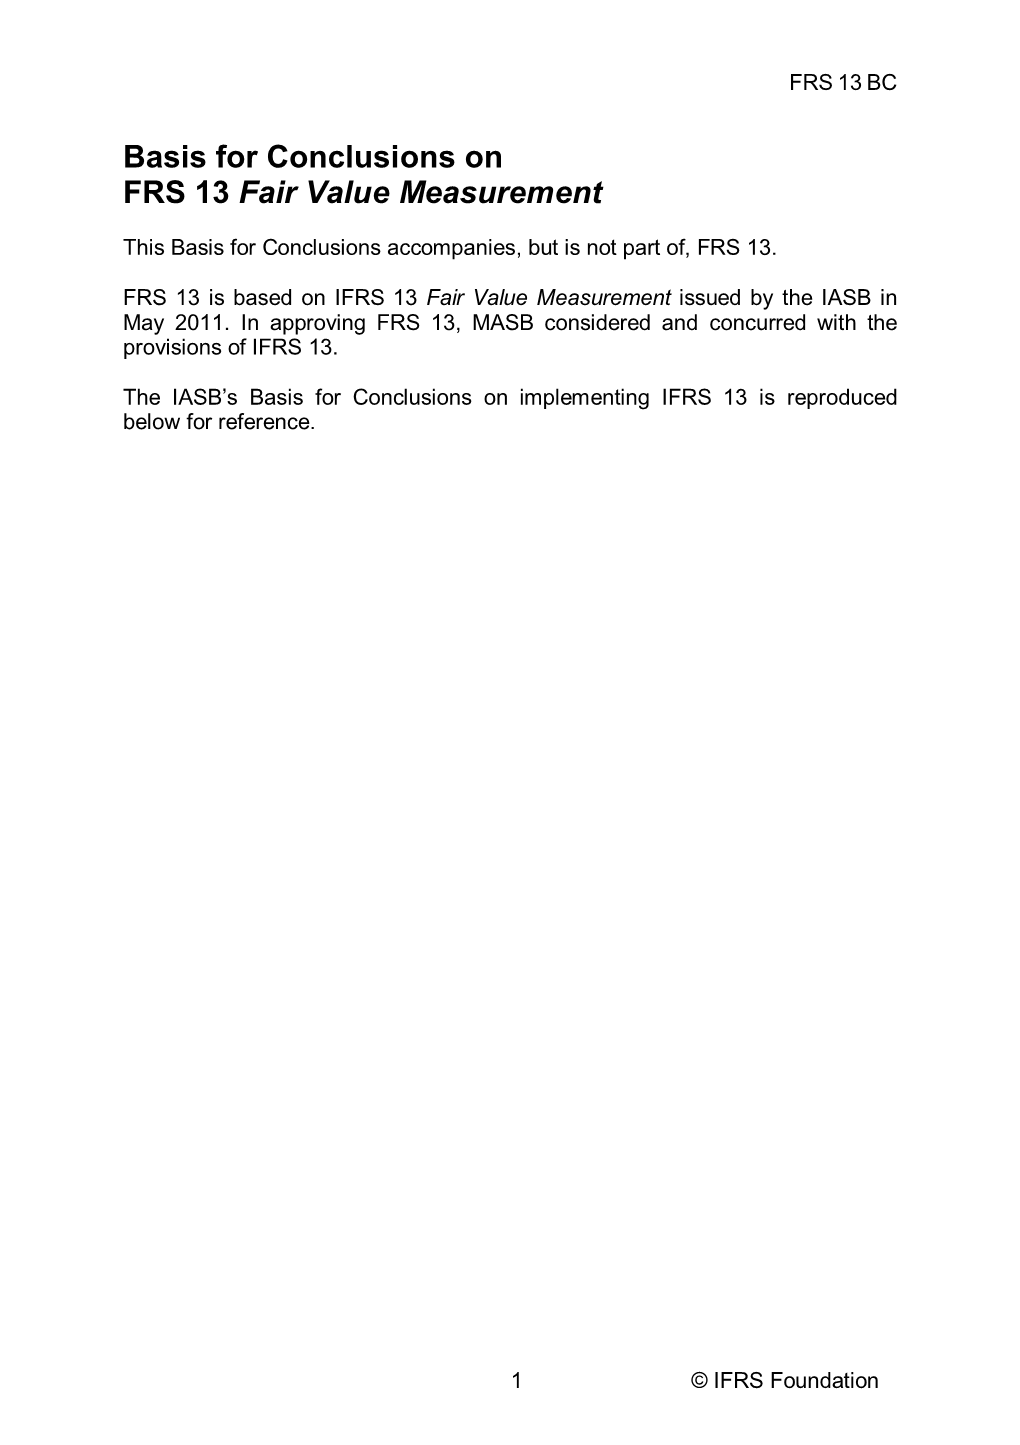 Basis for Conclusions on FRS 13 Fair Value Measurement